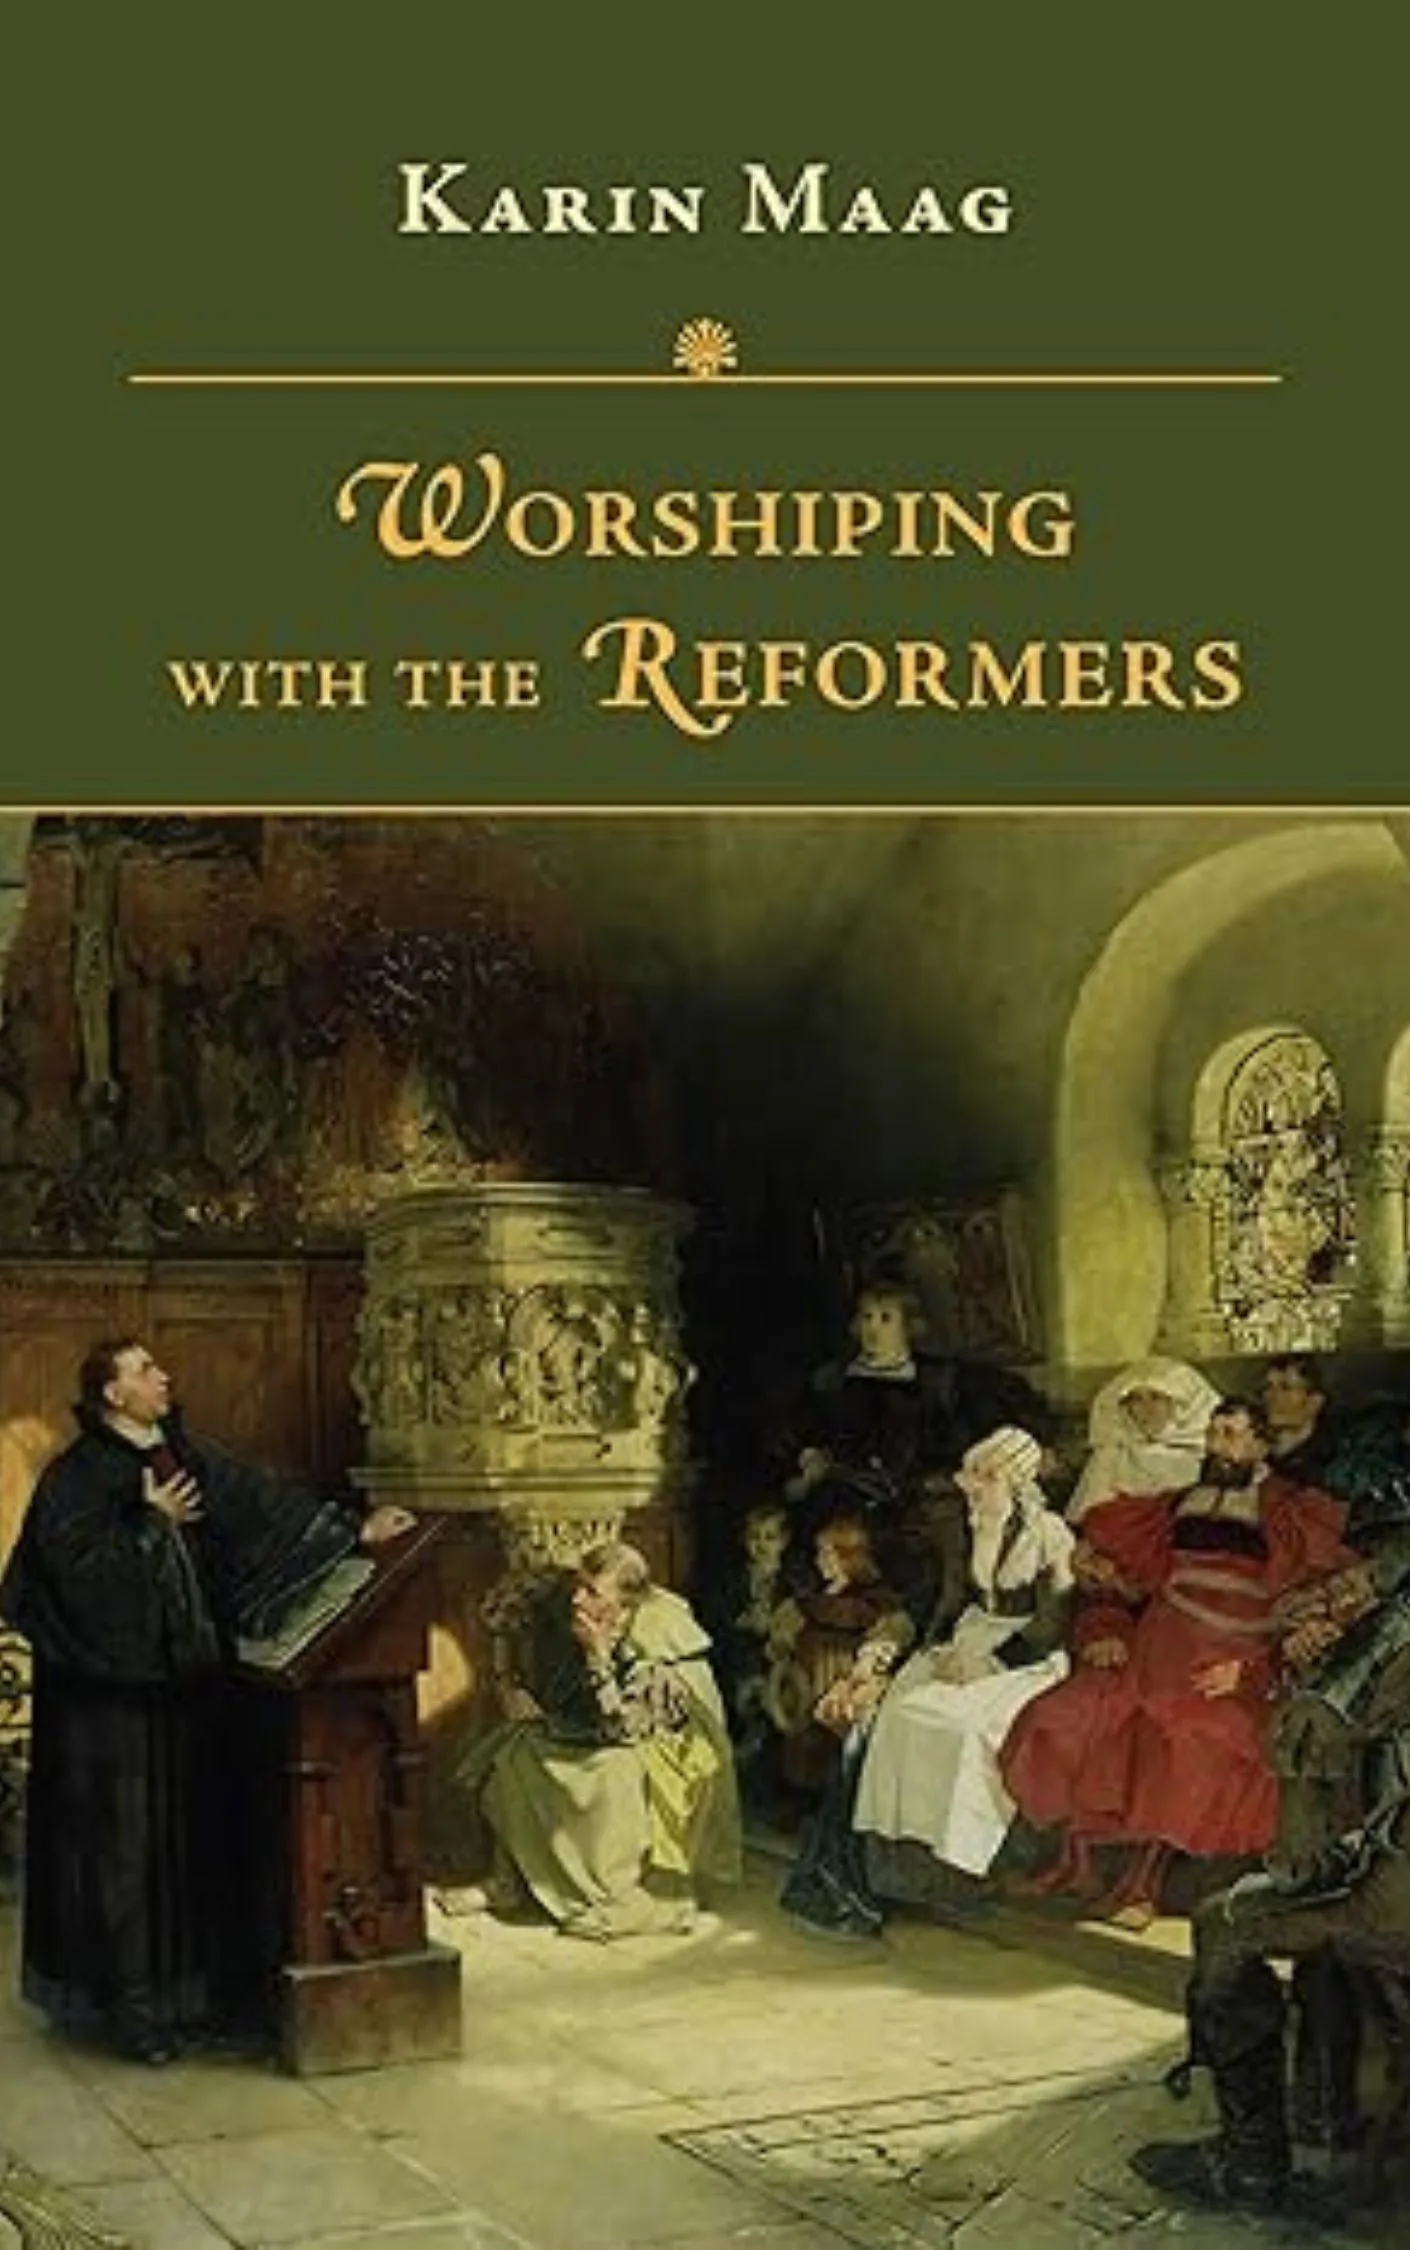 Worshiping with the Reformers by Karen Maag